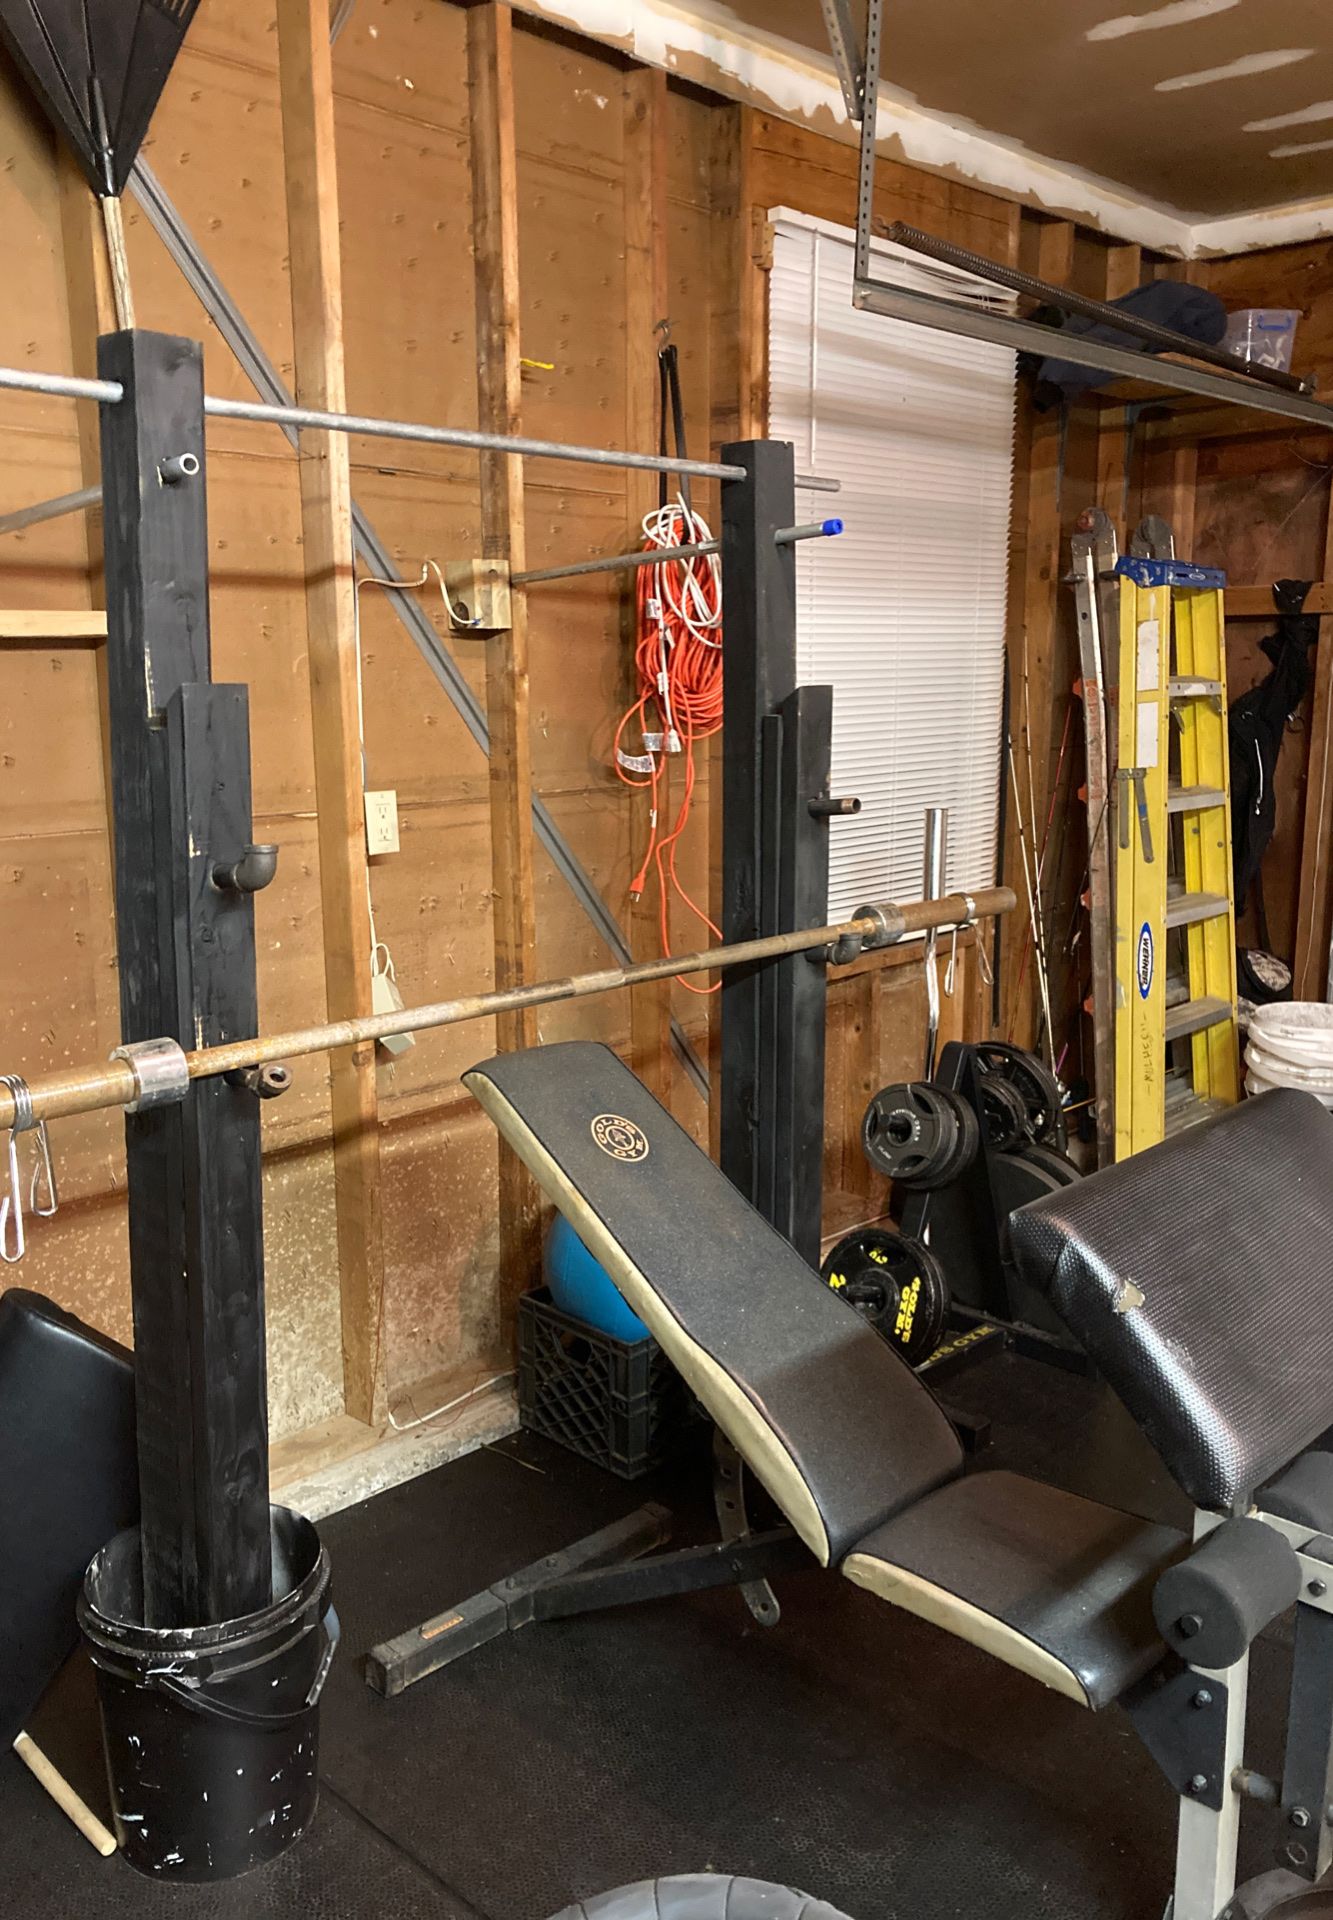 Home gym setup...bench, bar, weight tree and home made bench and squat rack